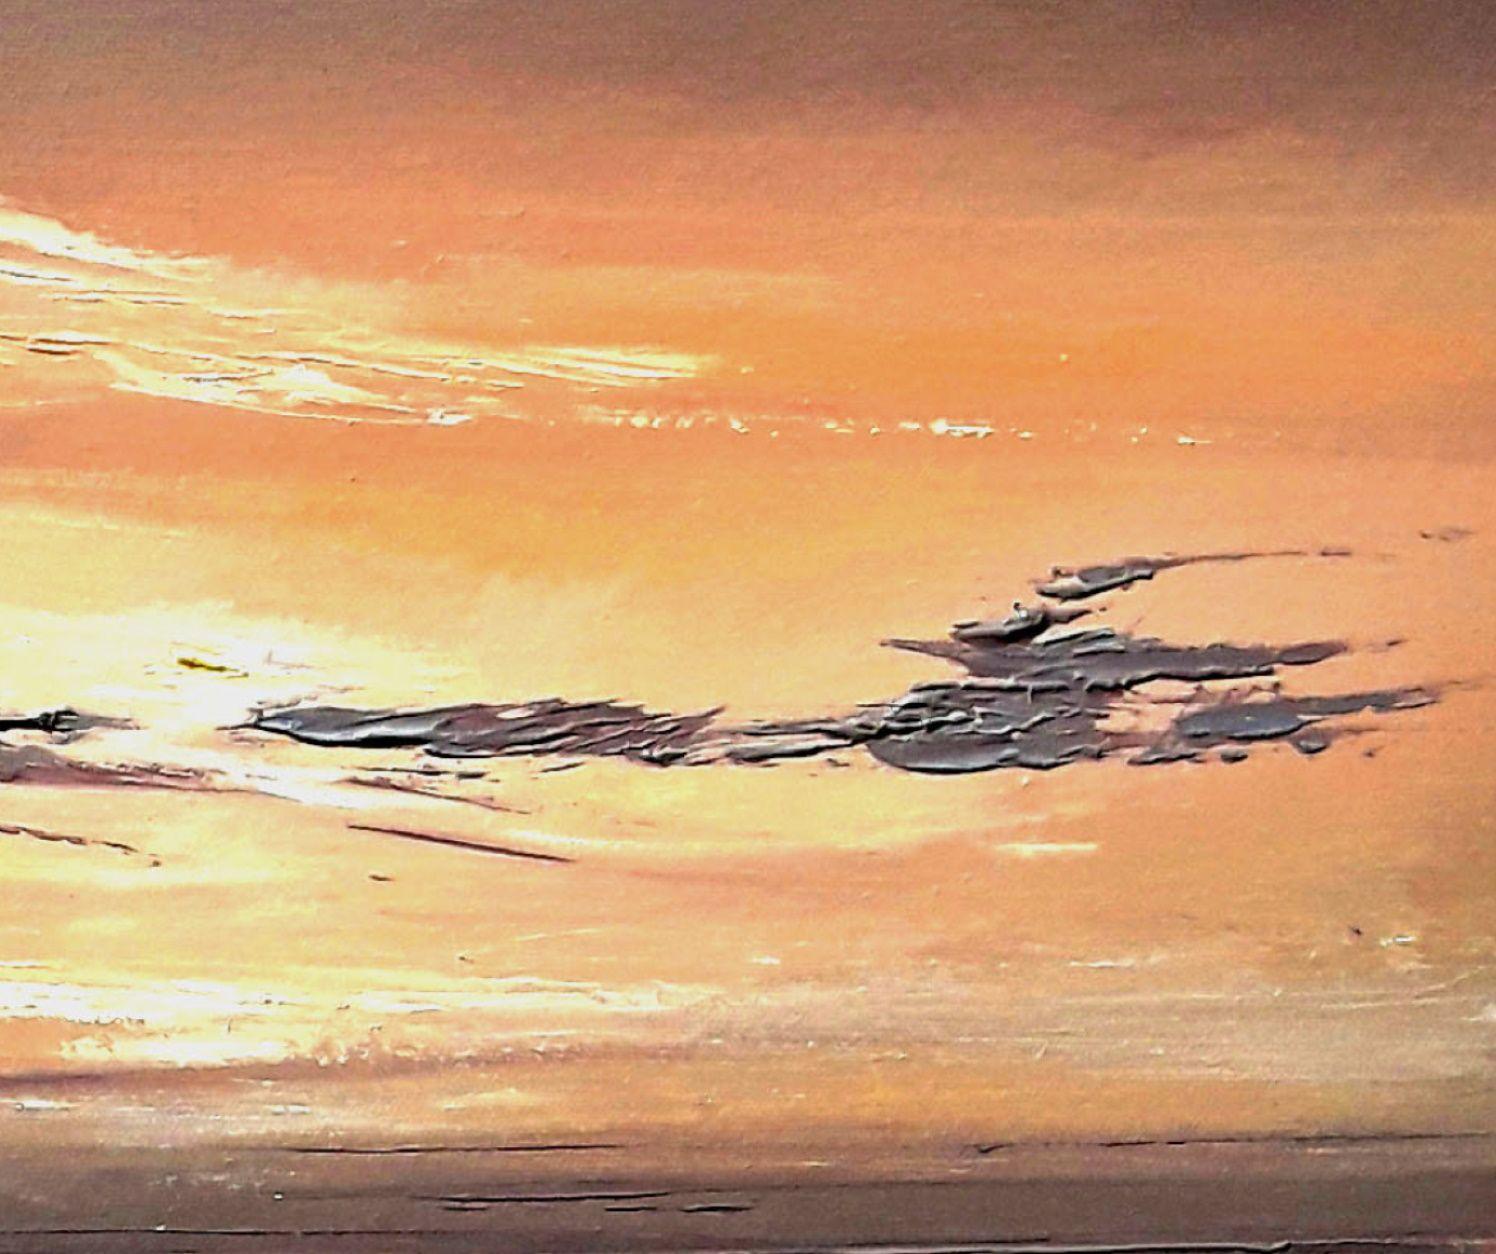 The sky is always moving and changing... always full of unexpected surprises and moments to try and capture forever.    â€¢ Cotton gallery canvas   â€¢ Finest quality professional oil pain  â€¢ This original artwork has been gloss varnished for